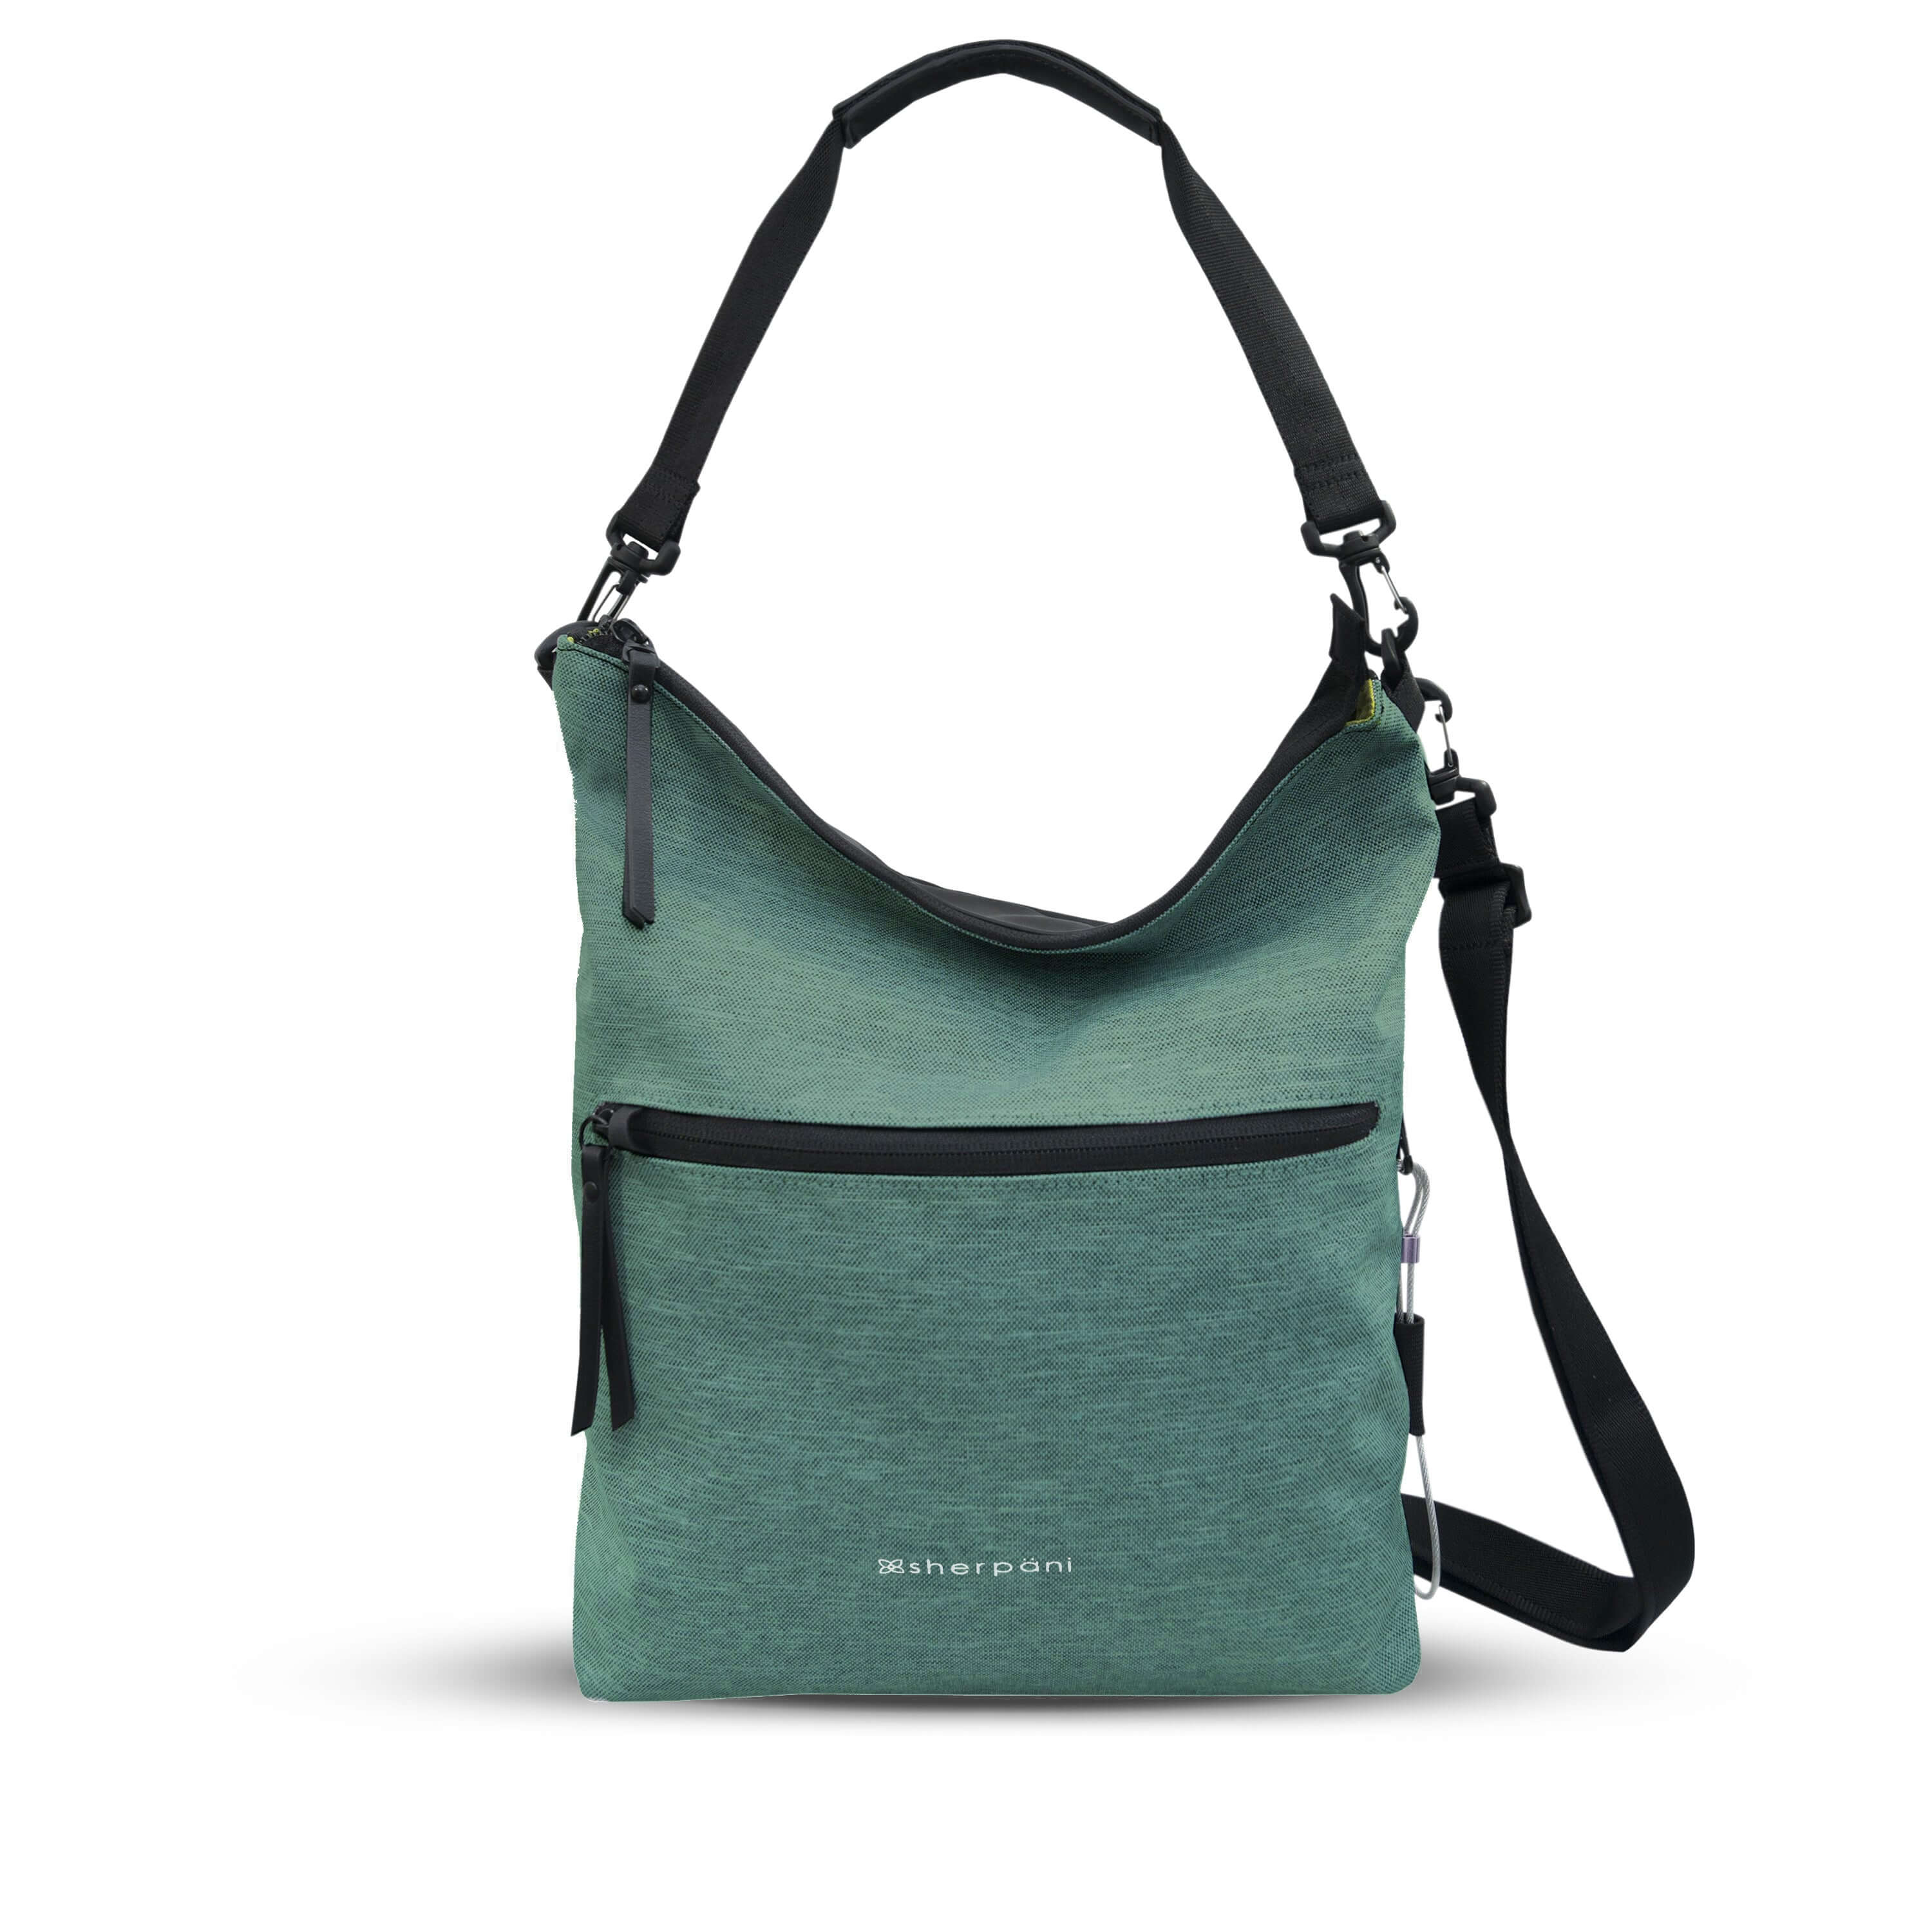 Flat front view of Sherpani's Anti-Theft bag, the Vale AT in Teal with vegan leather accents in black. The bag is standing tall with a detachable tote strap clipped to the top. There is an adjustable/detachable crossbody strap and a chair loop lock is clipped to the side of the bag. The front features an external compartment with a locking zipper.